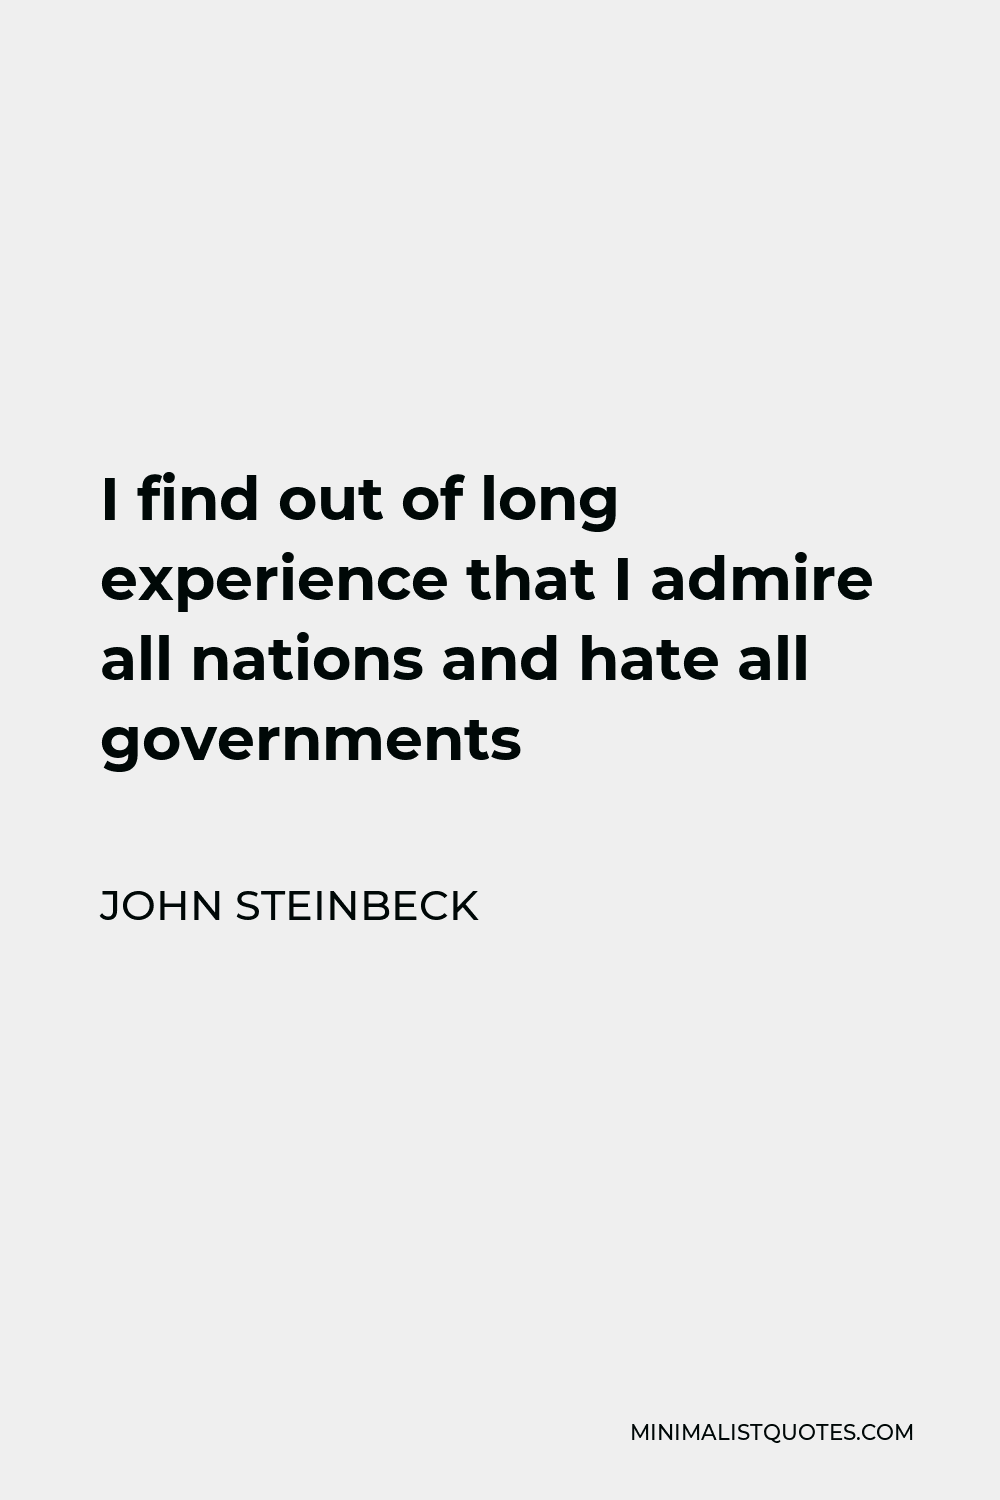 John Steinbeck Quote - I find out of long experience that I admire all nations and hate all governments